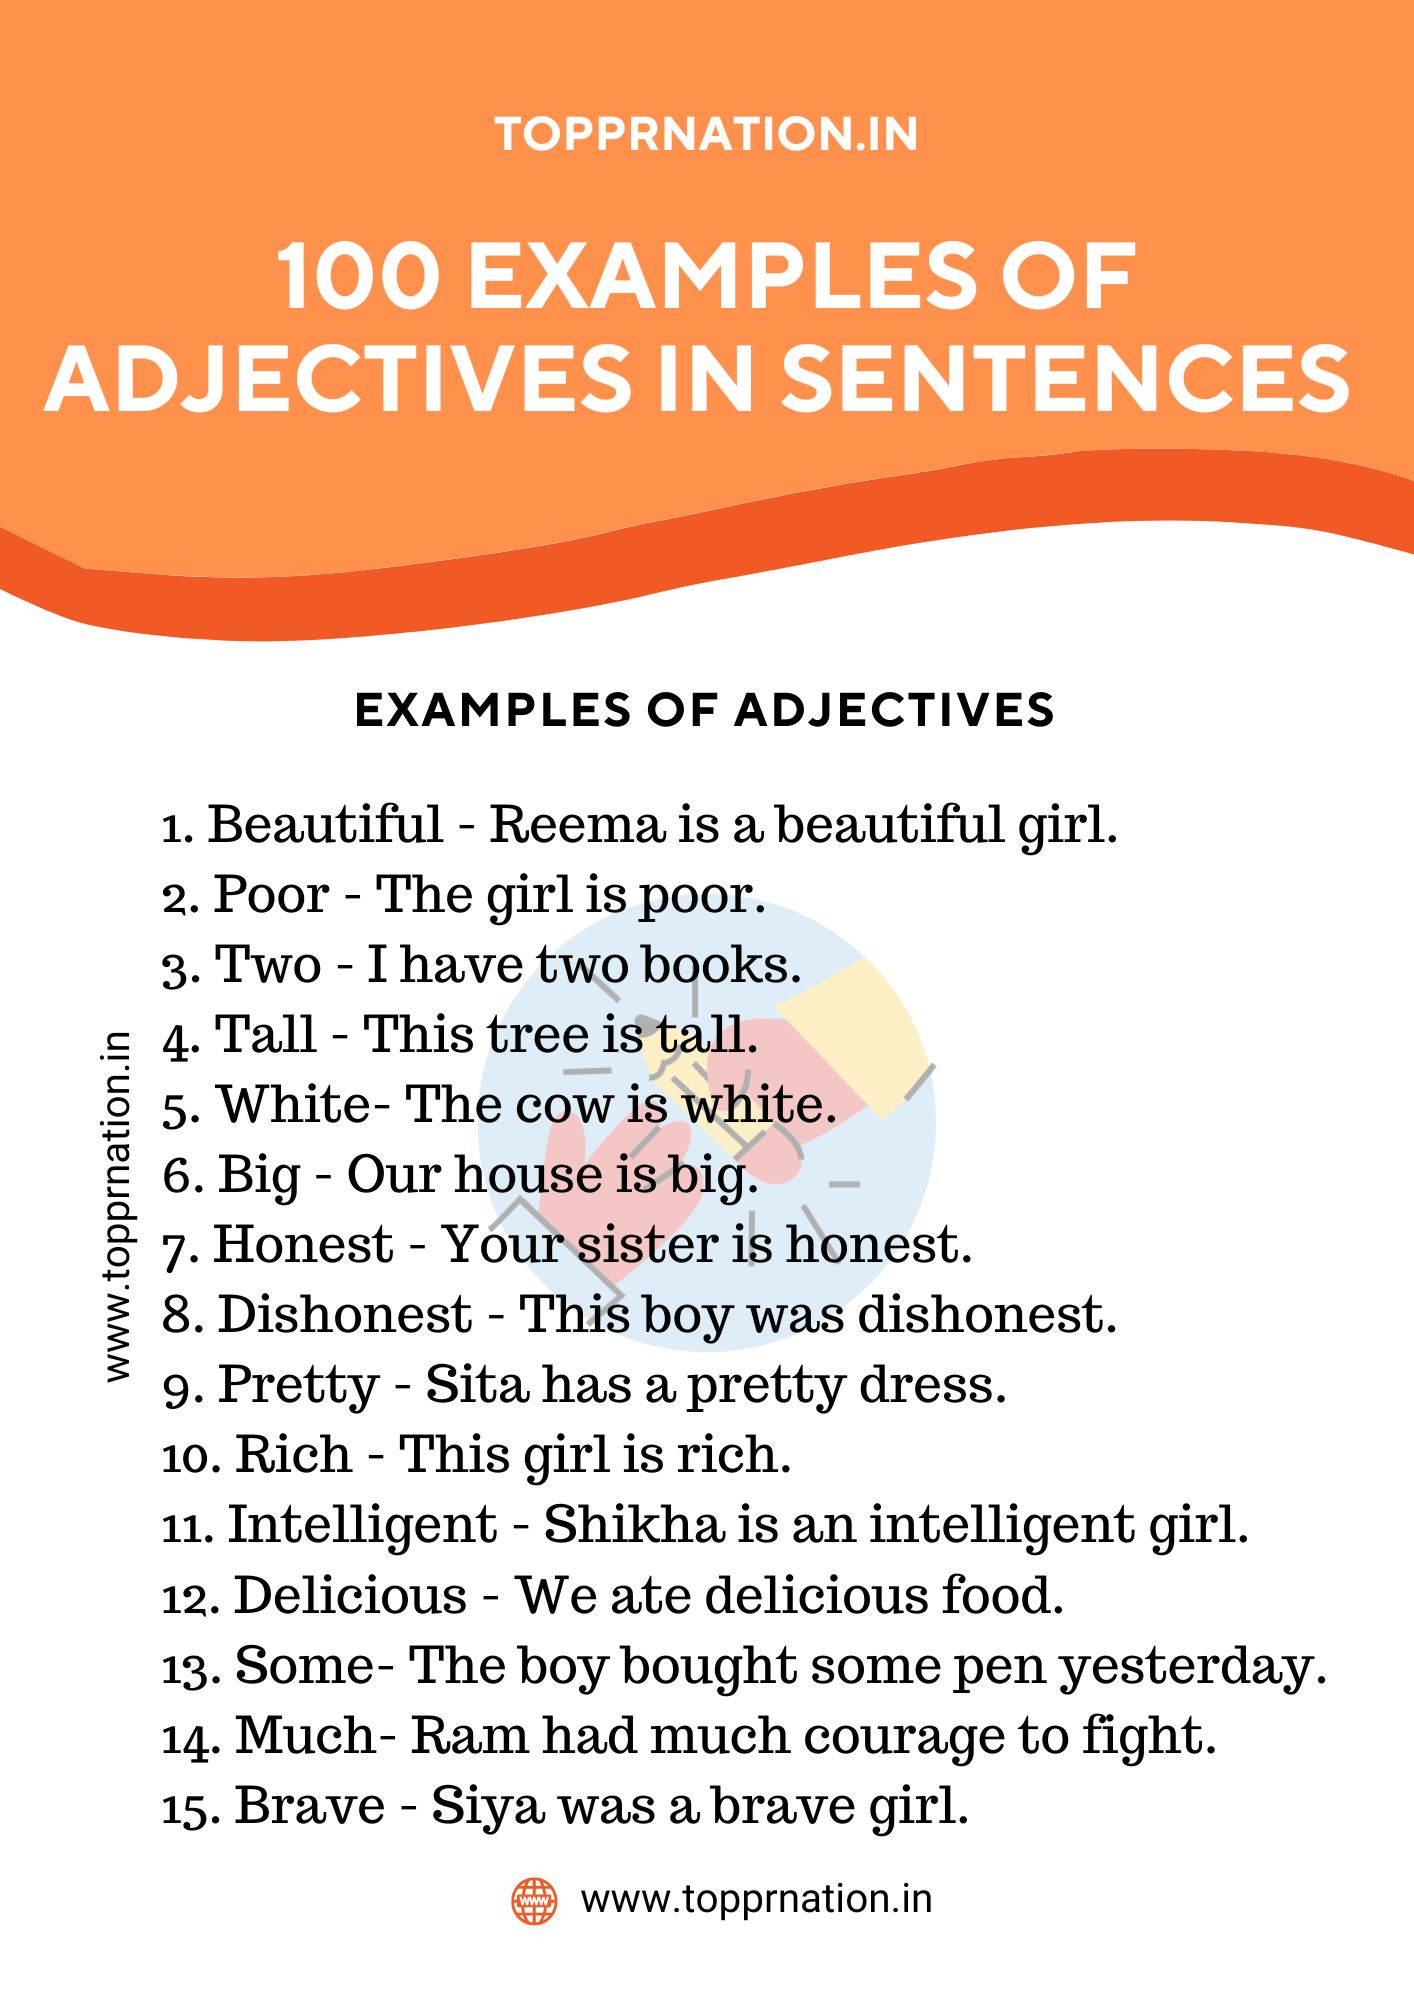 100-examples-of-adjectives-in-sentences